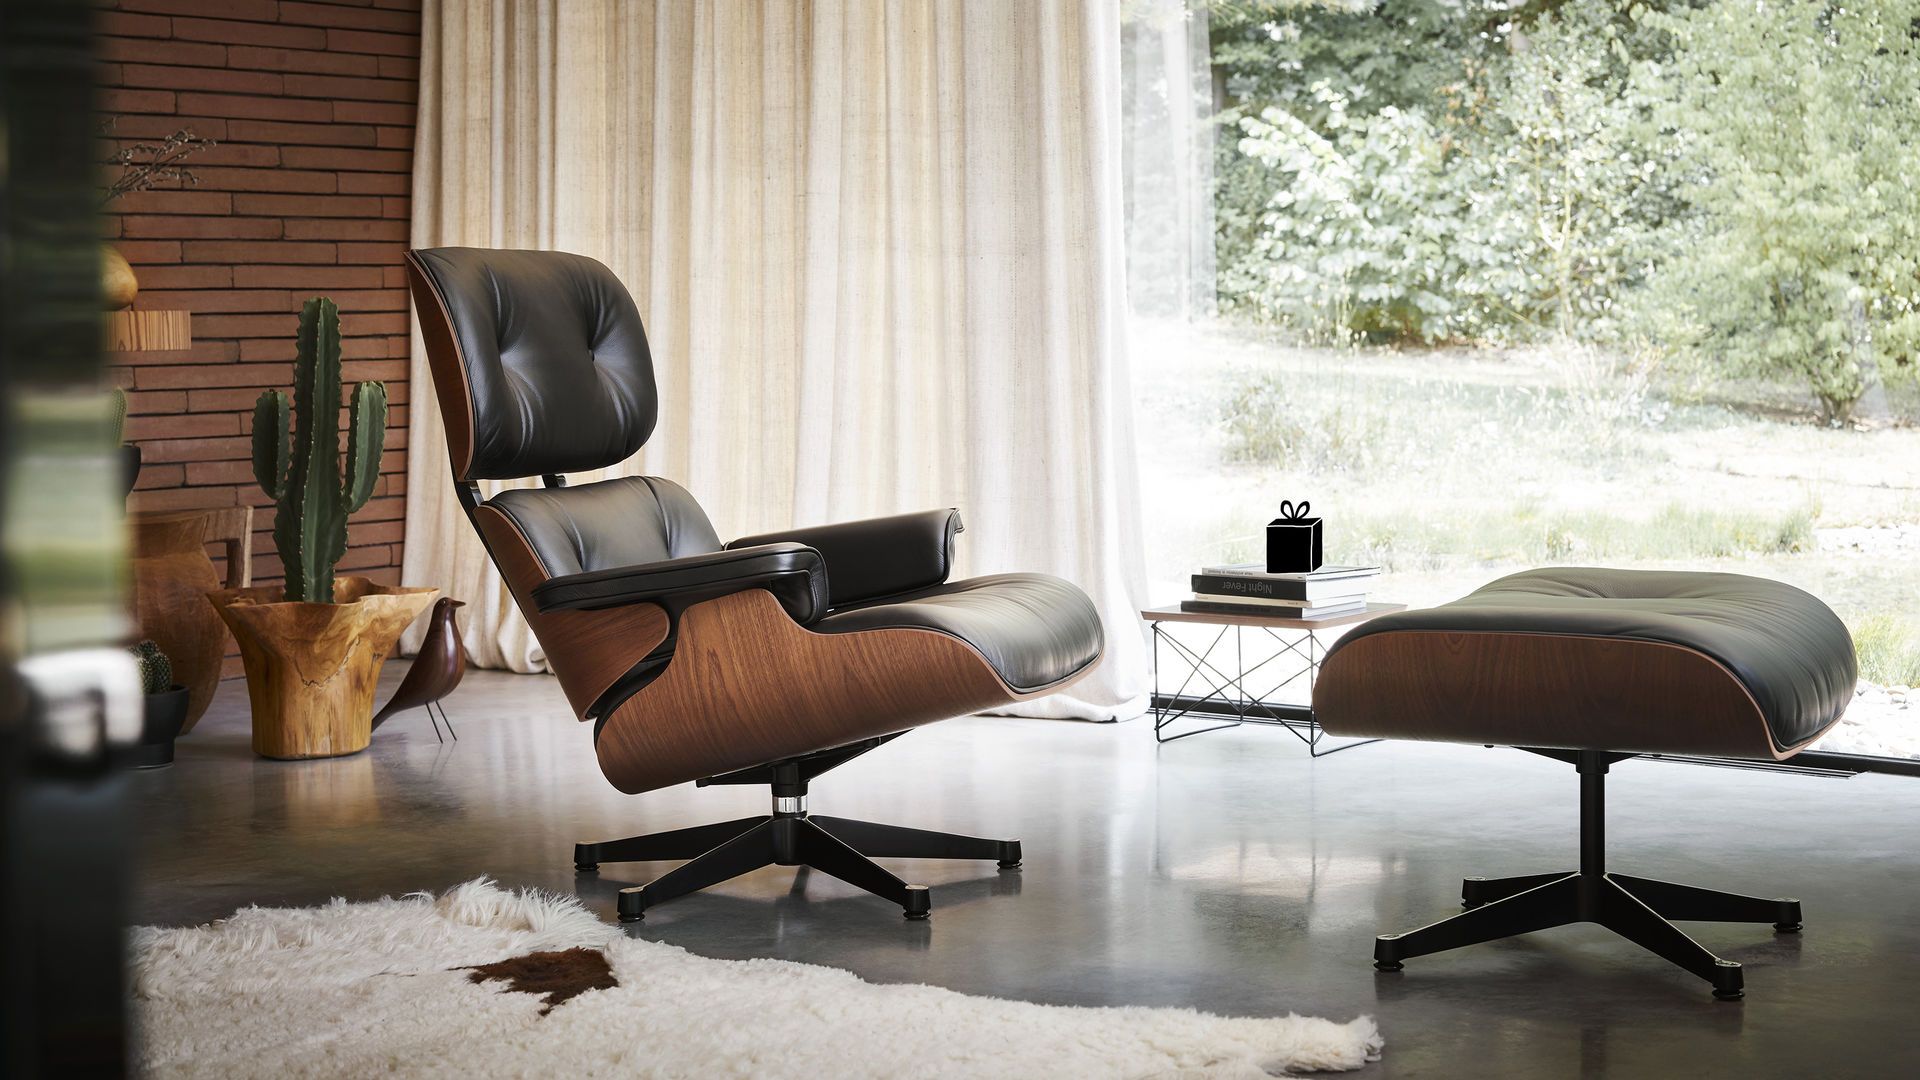 The Eames Lounge Chair: A Bold New Design for the Modern Home & Museum